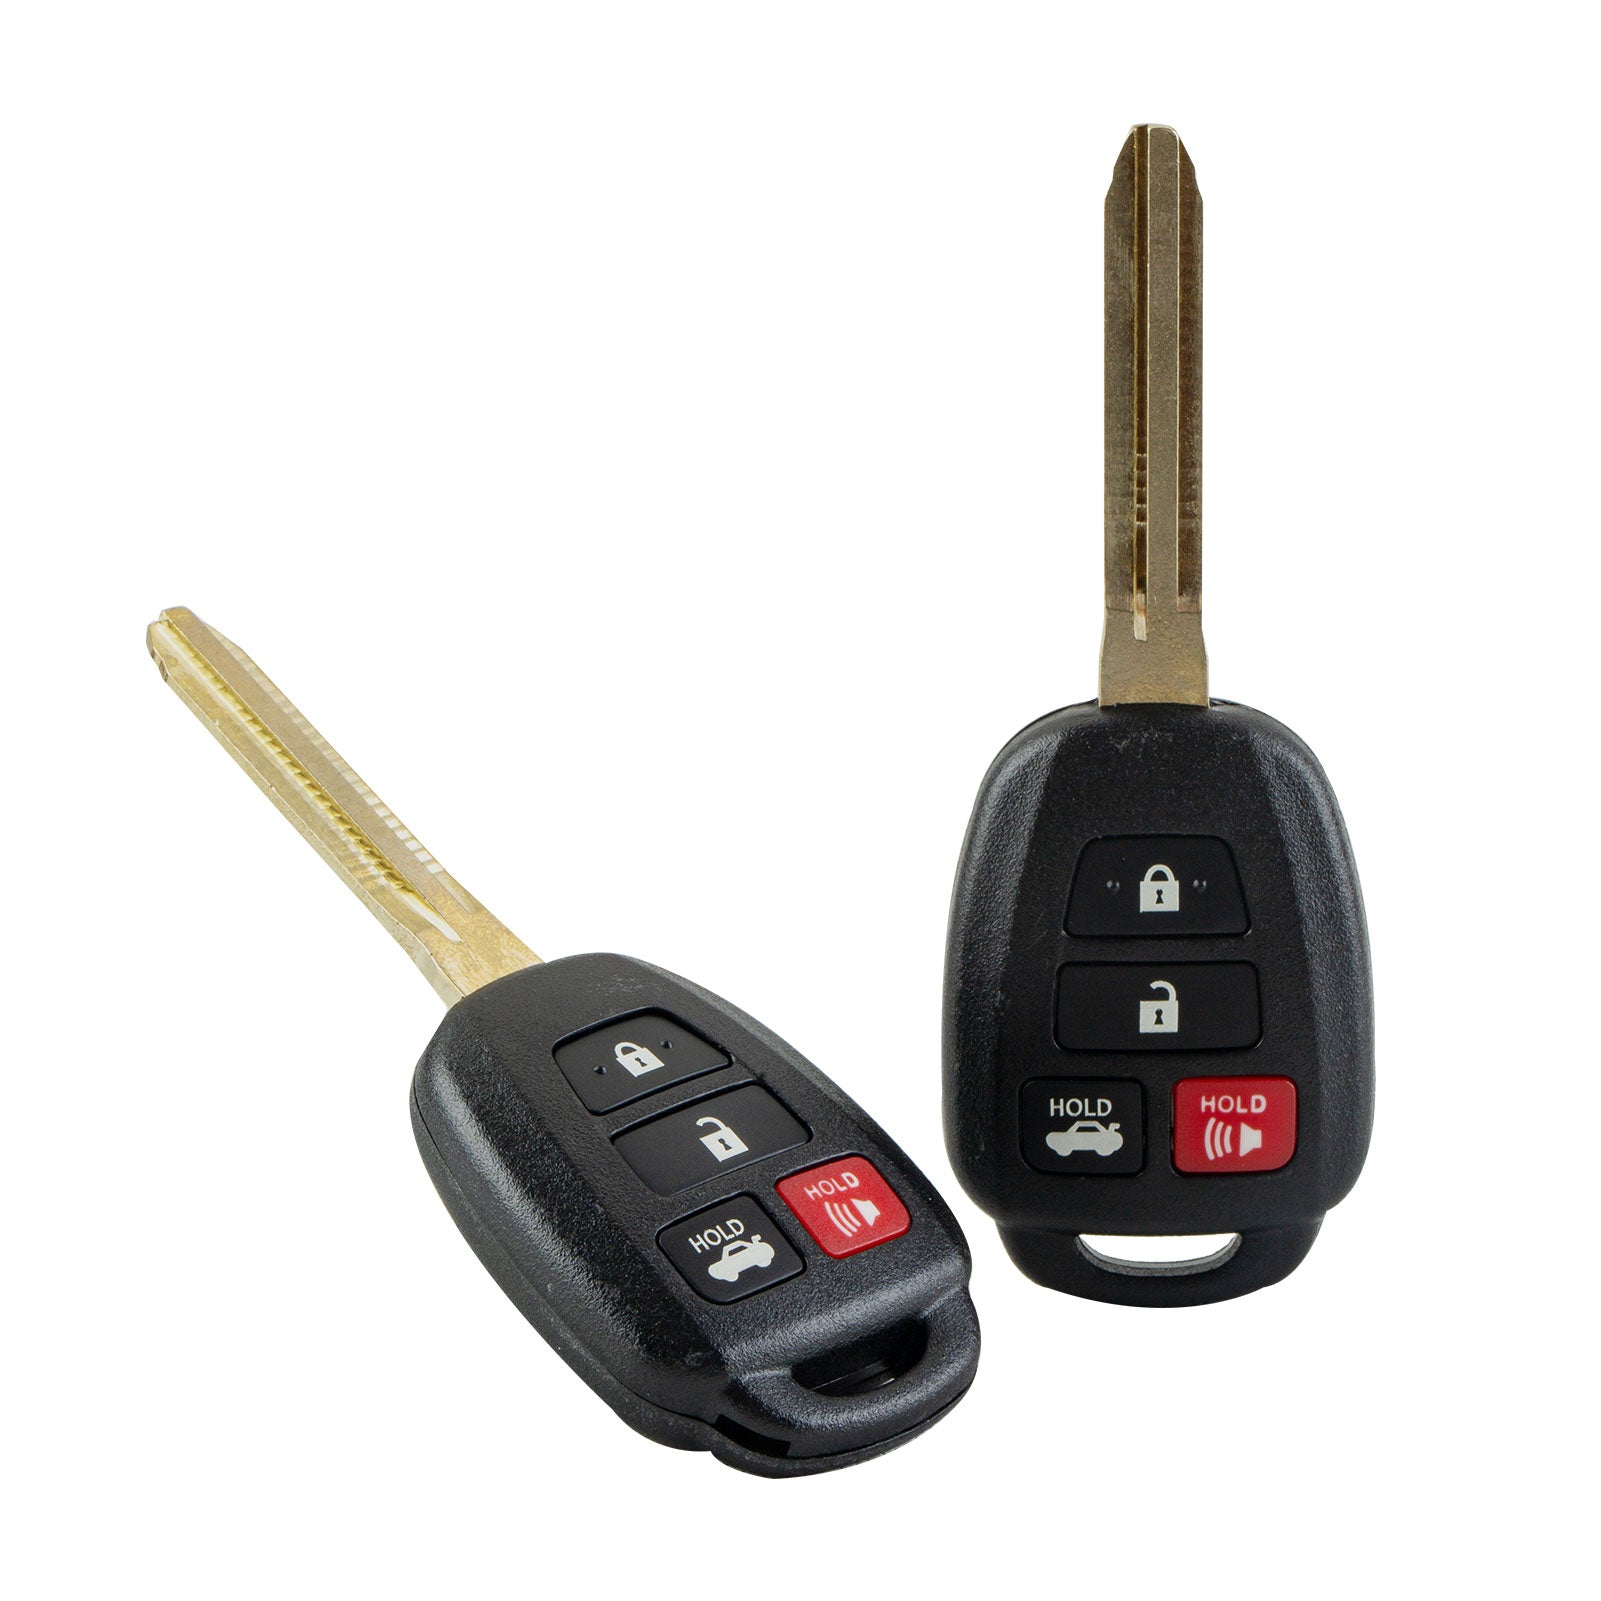 New Keyless Entry Remote Car Key Replacement for 2014-2019 Toyota Highlander Remote H Chip GQ4-52T  KR-T4SG